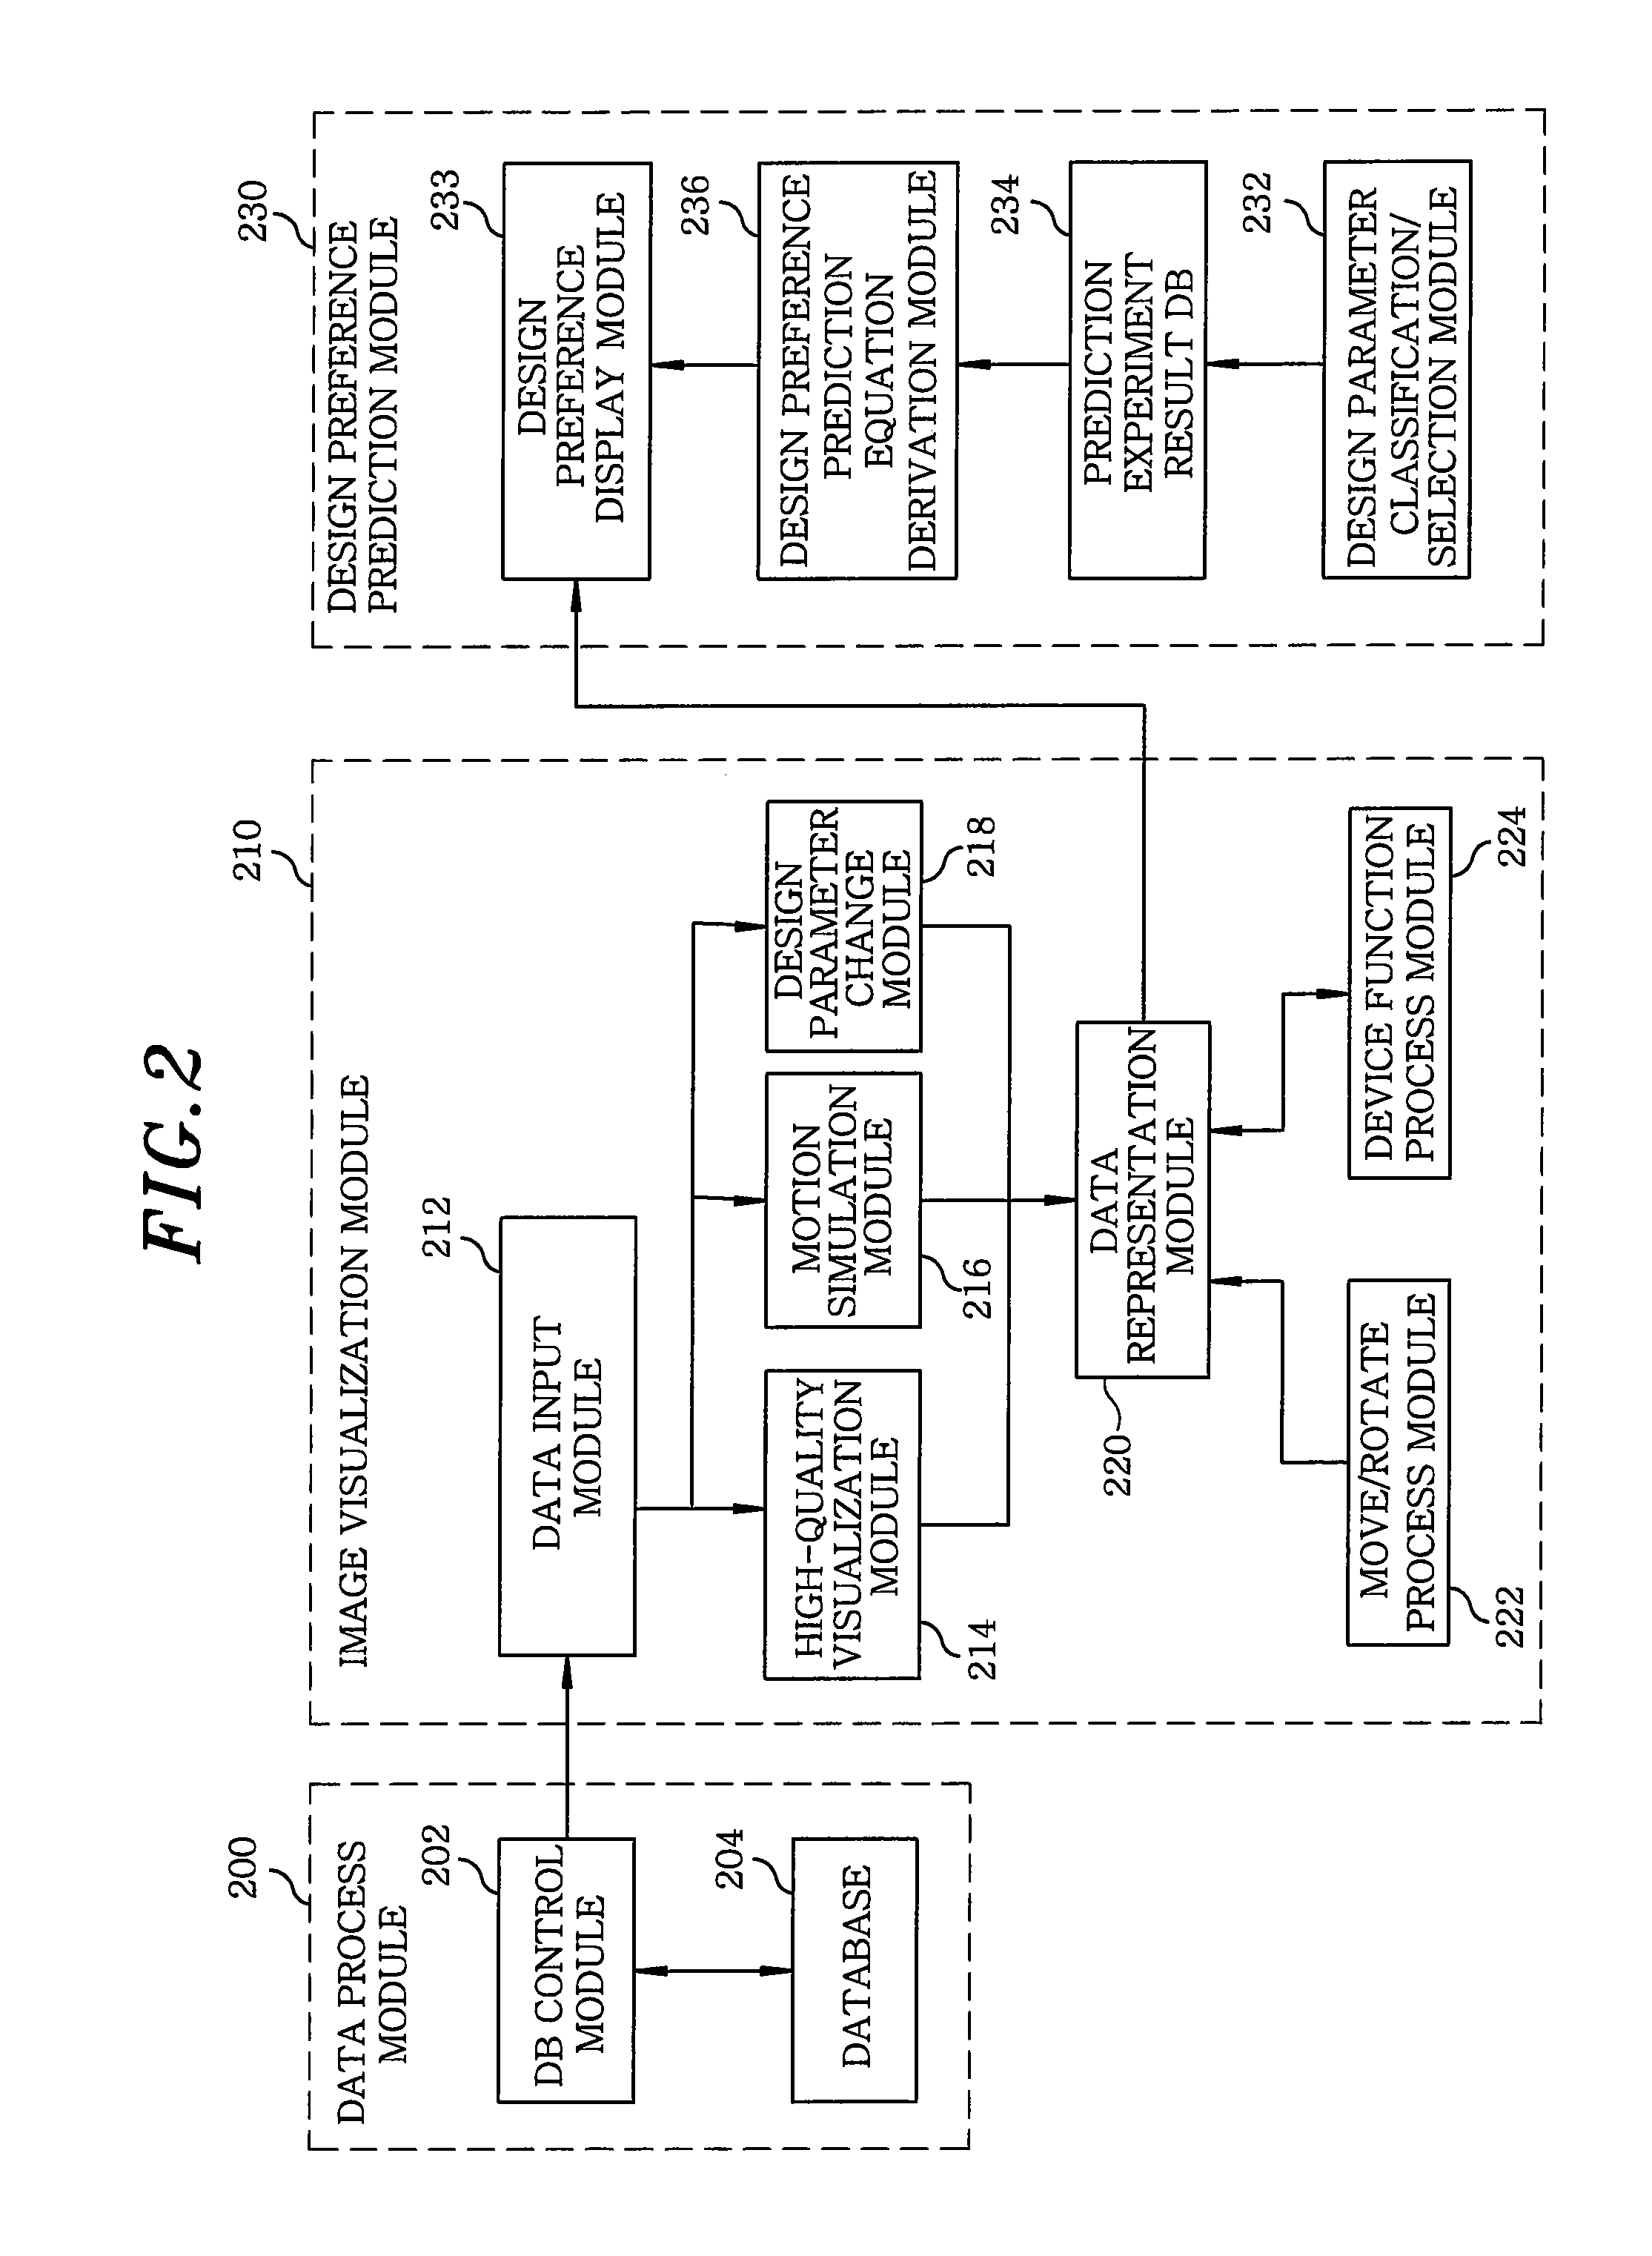 System and method for design evaluation of mobile devices using virtual reality based prototypes